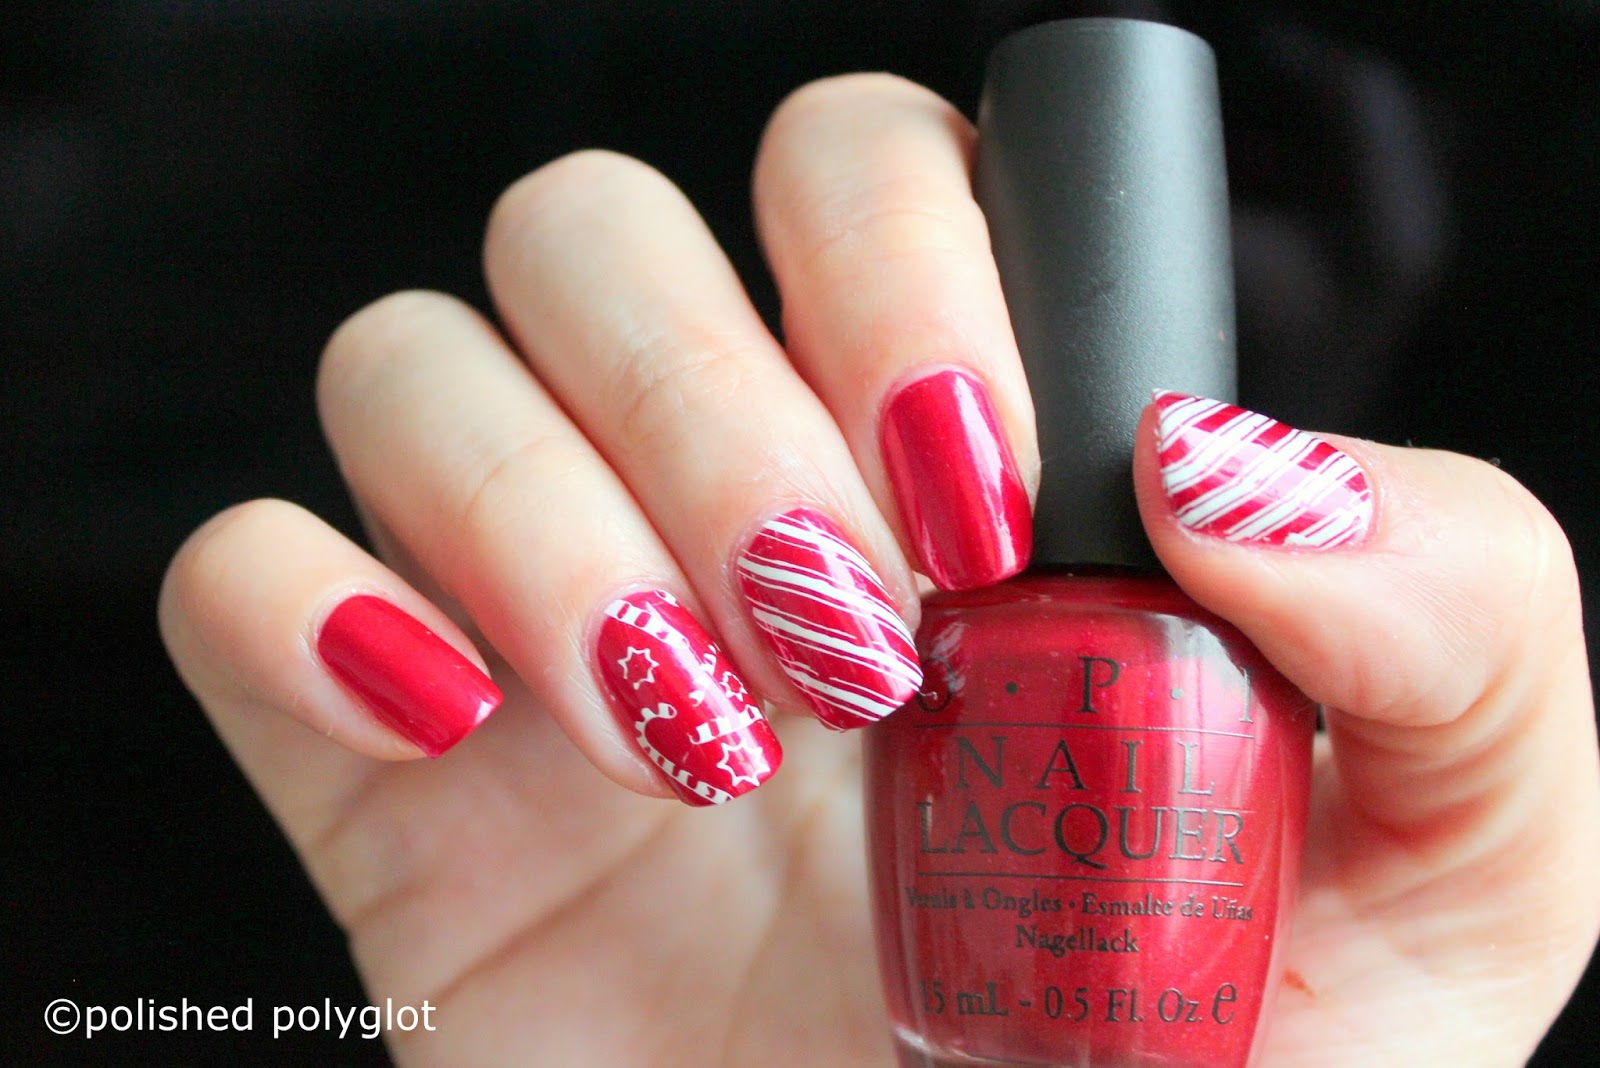 2. 25+ Best Candy Cane Nail Art Designs on Pinterest - wide 3